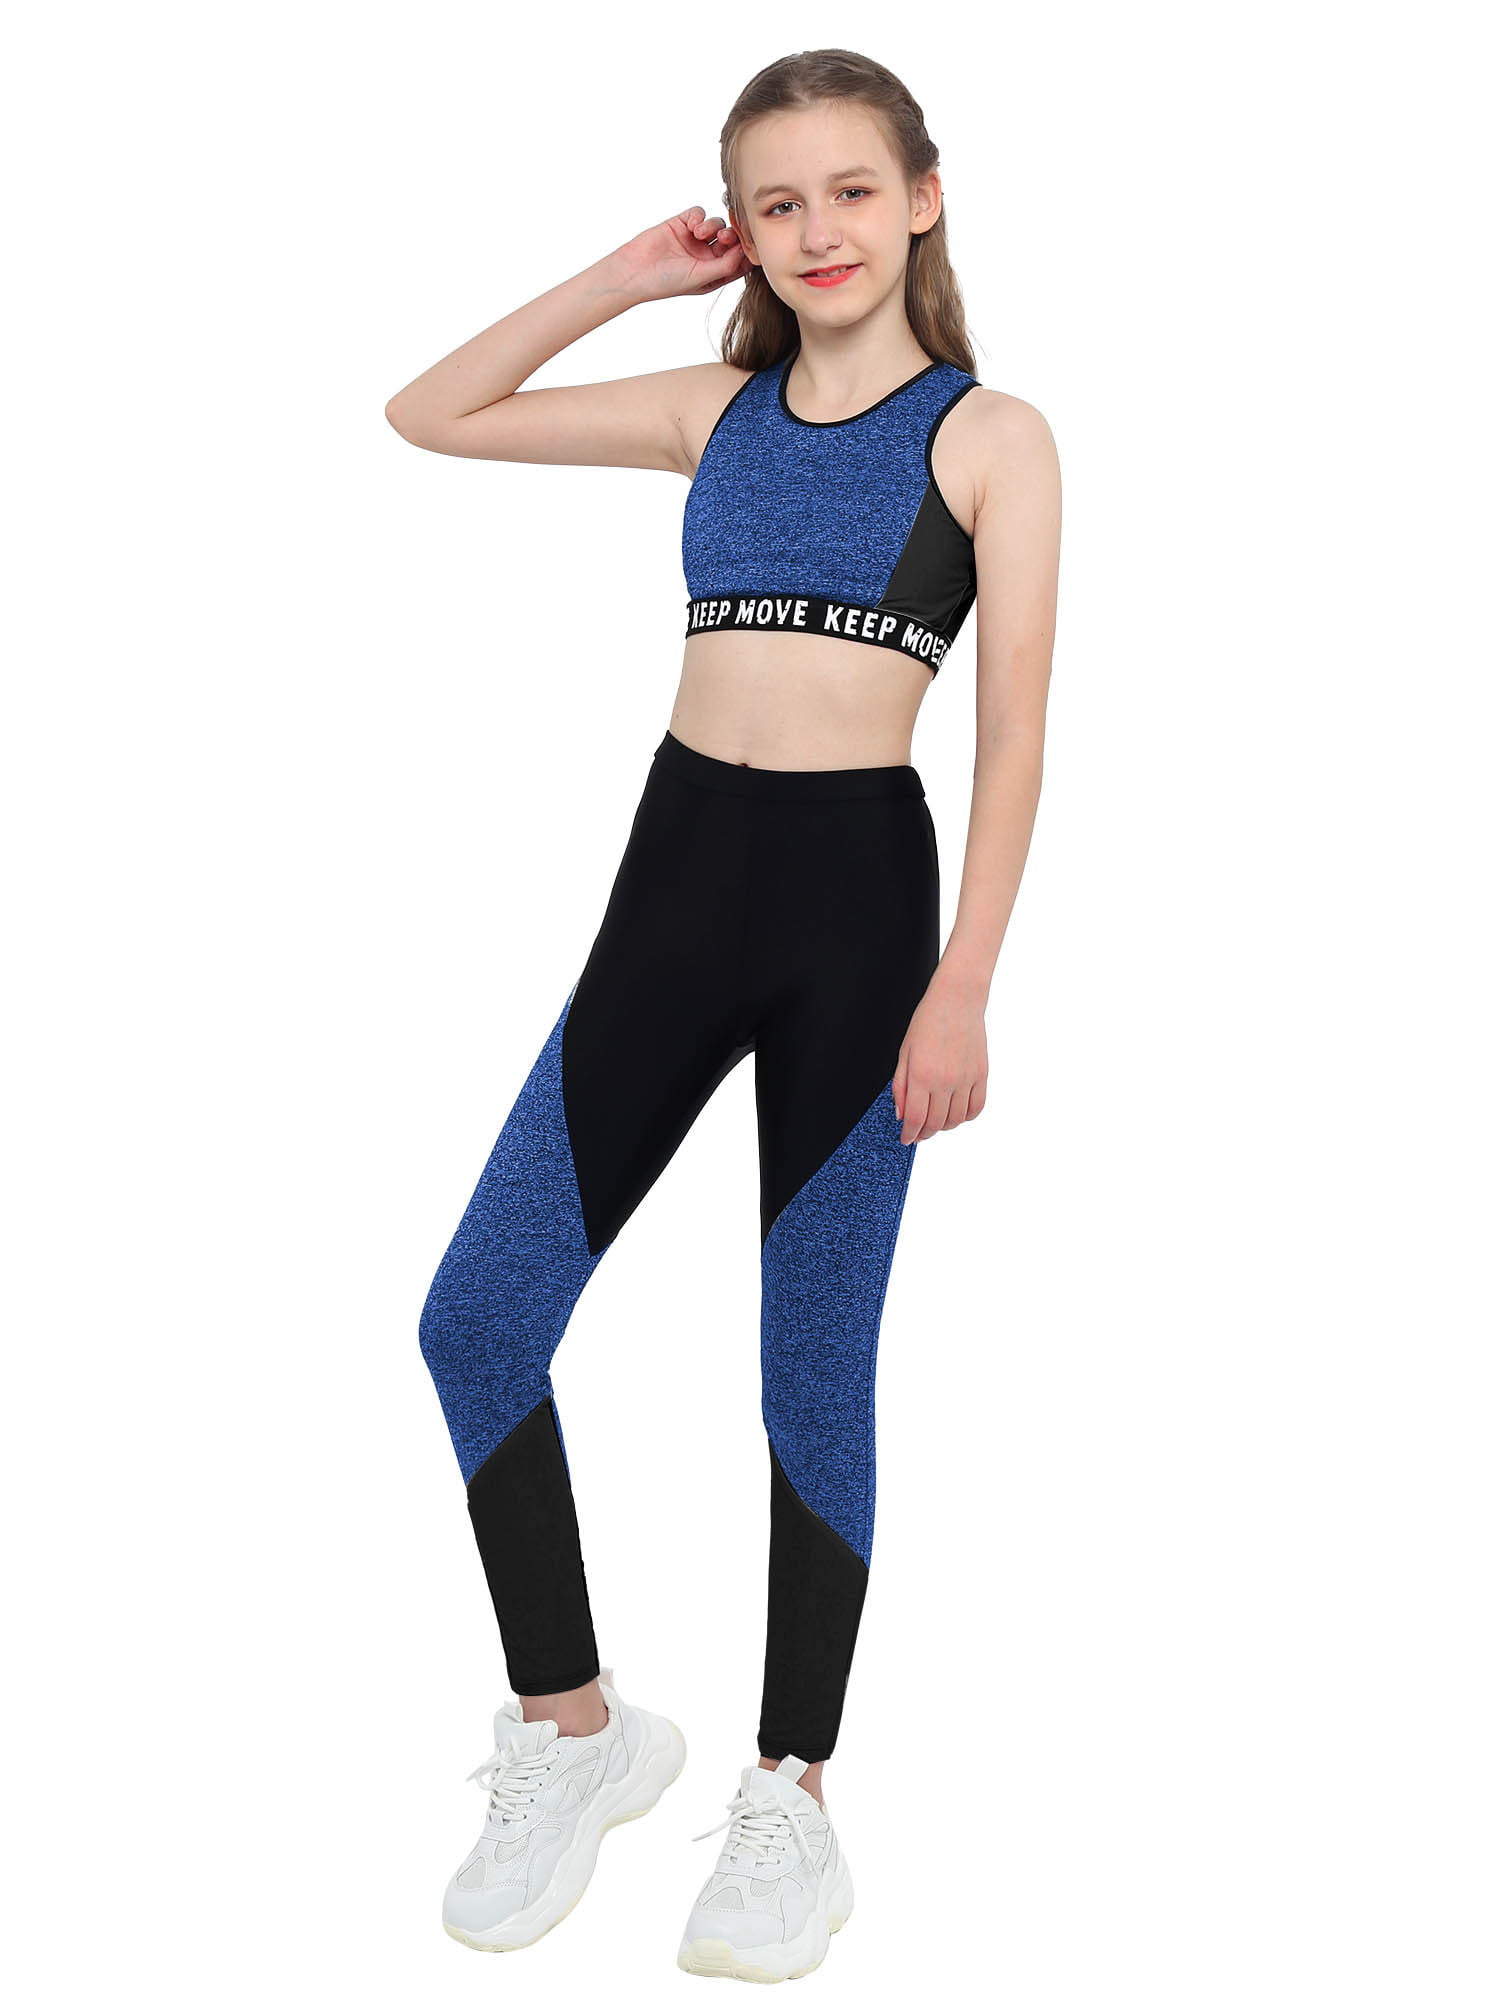 inhzoy Kids Girls Athletic Outfit Sports Bra Crop Top with Yoga Leggings  Blue Black 12